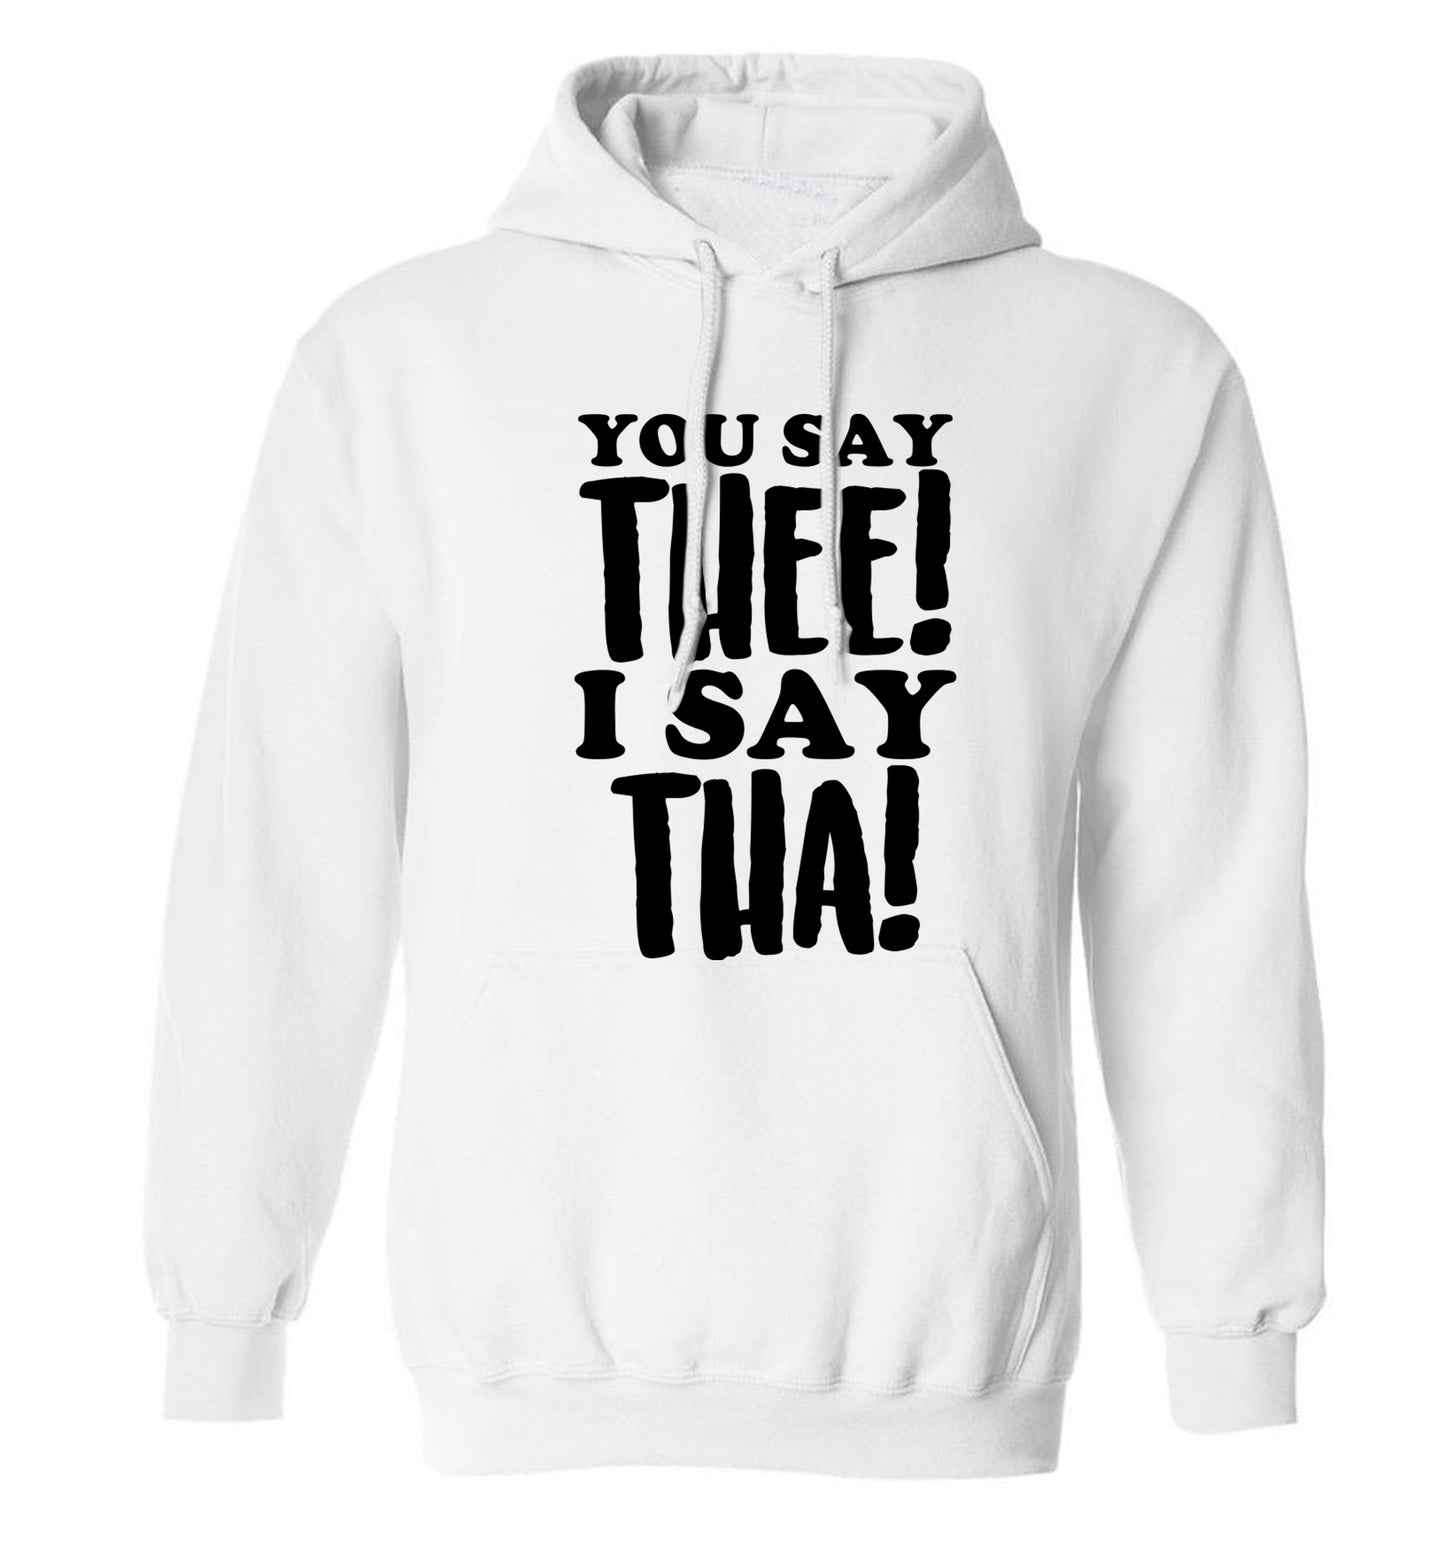 You say thee I say tha adults unisex white hoodie 2XL